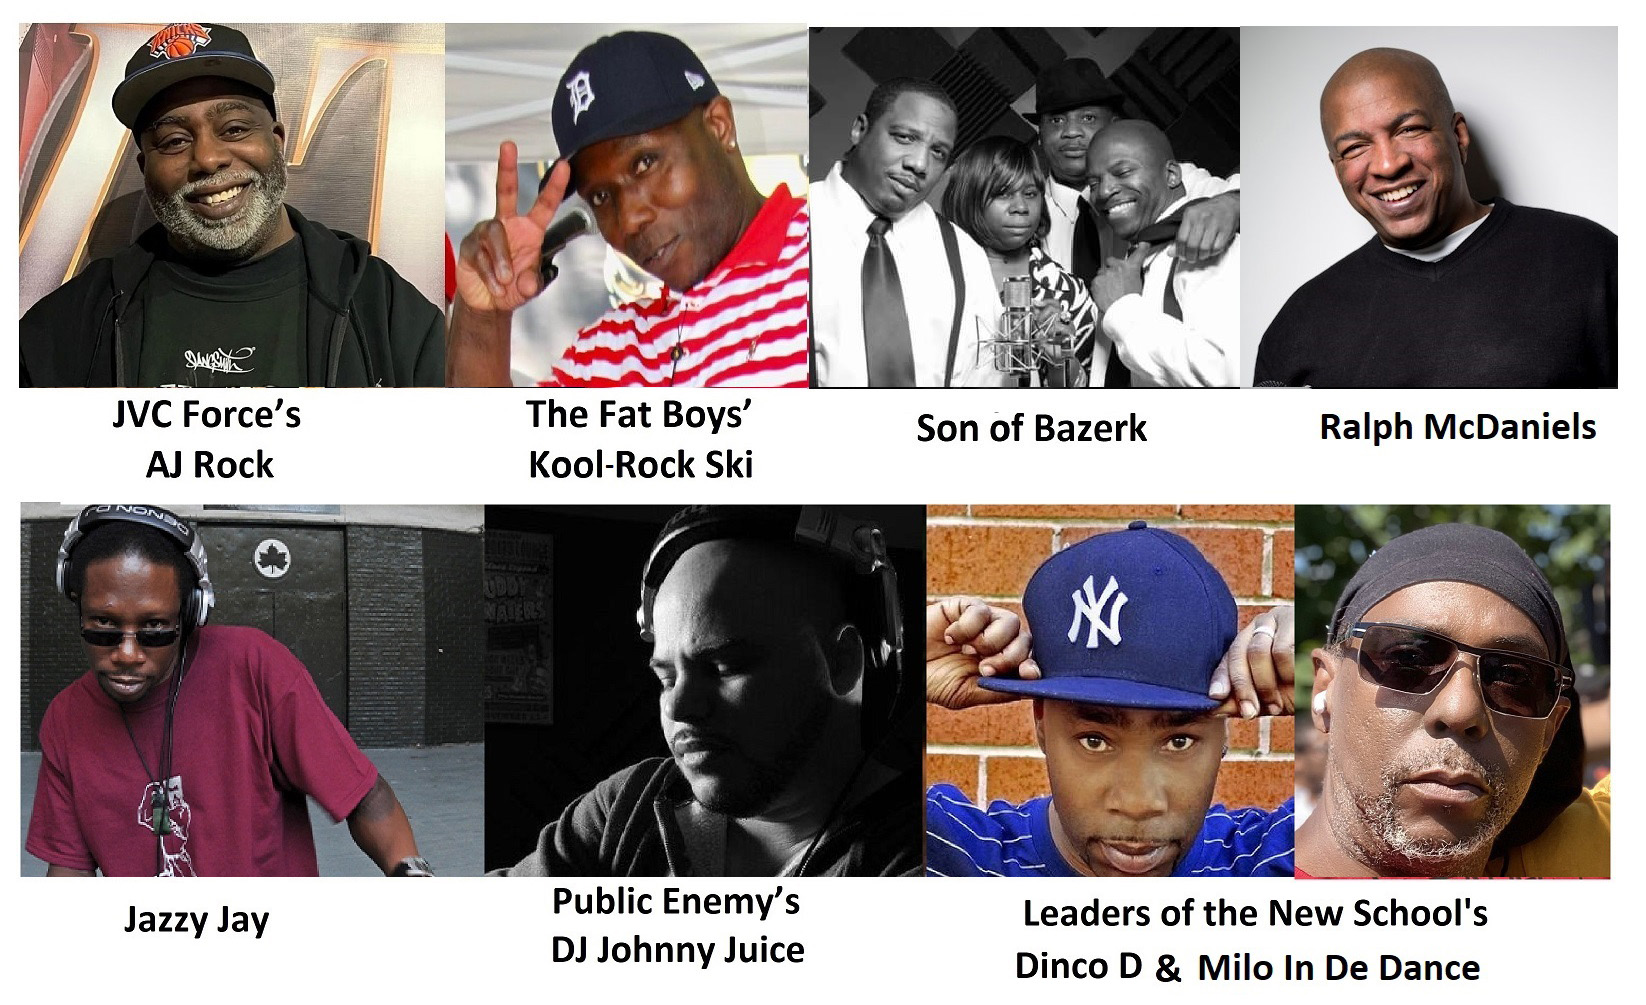 Long Island Music & Entertainment Hall of Fame to Celebrate Hip-Hop’s 50th Anniversary with  Hip-Hop Concert